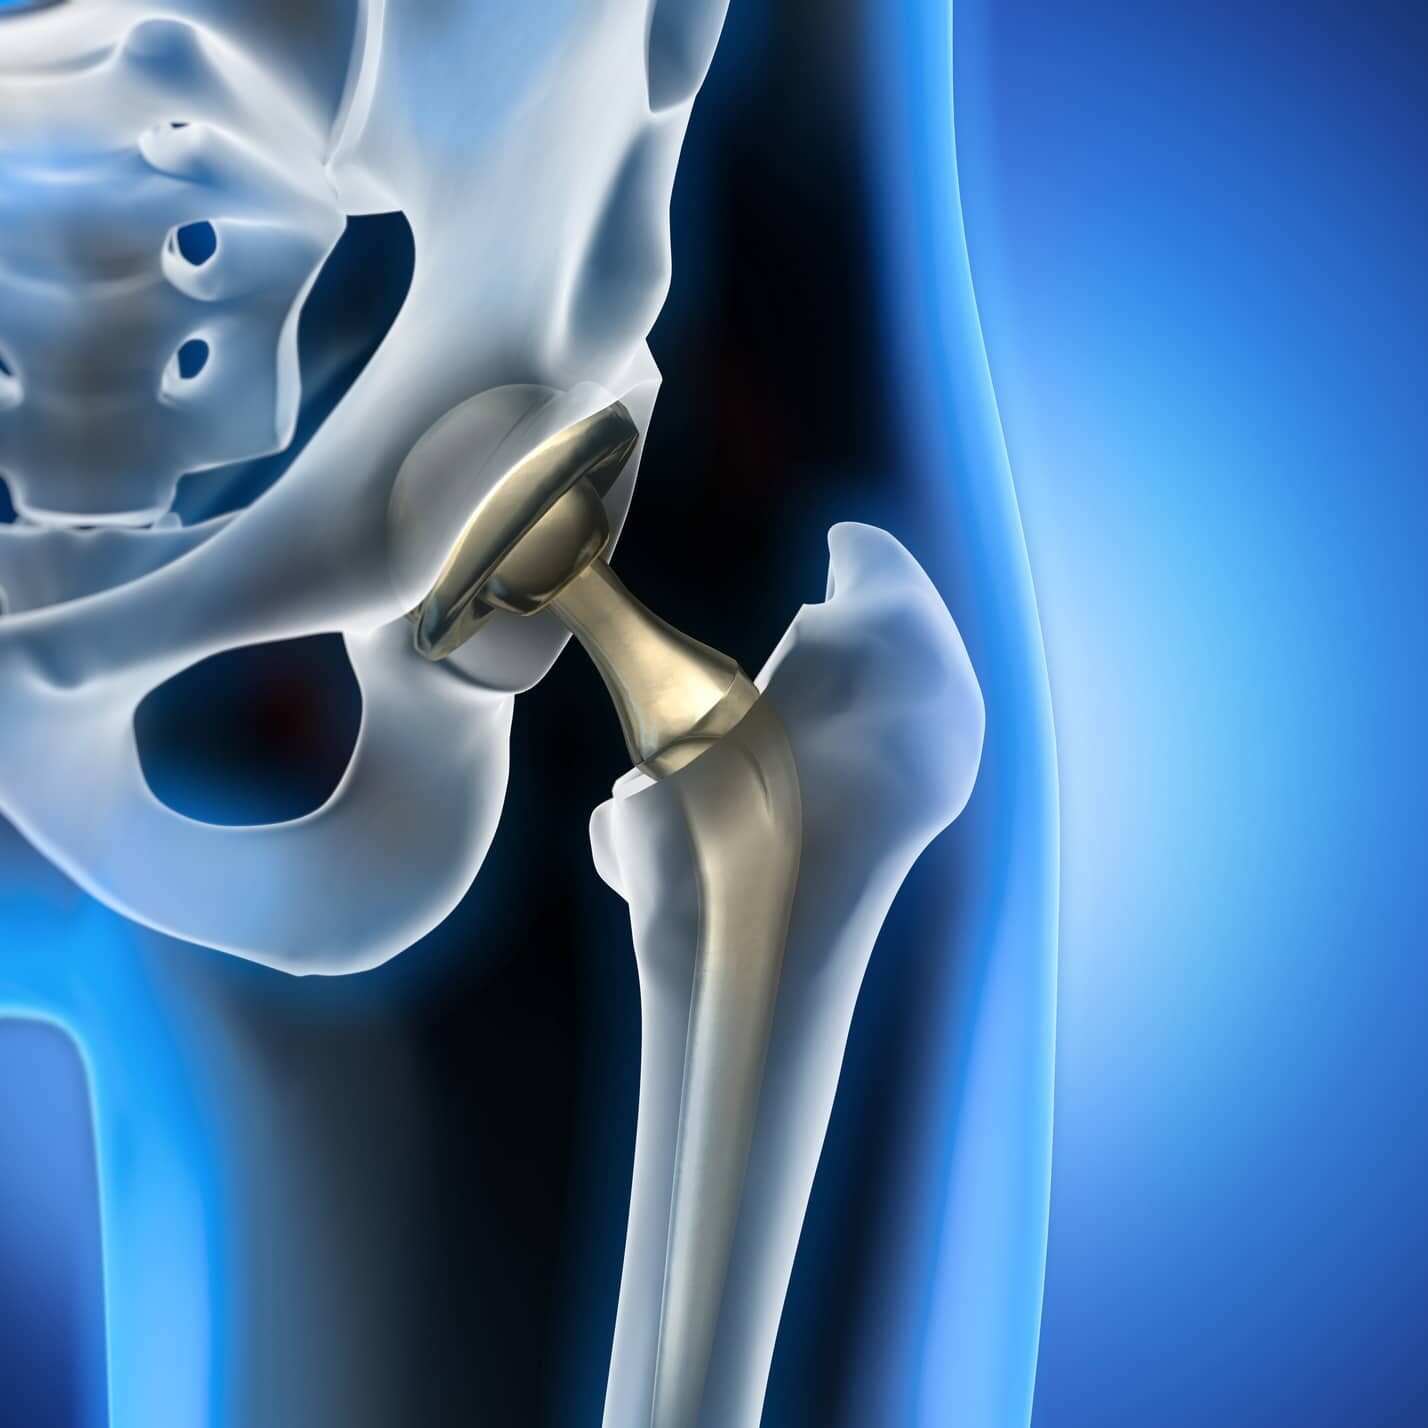 3d rendering of total hip replacement - medical illustration